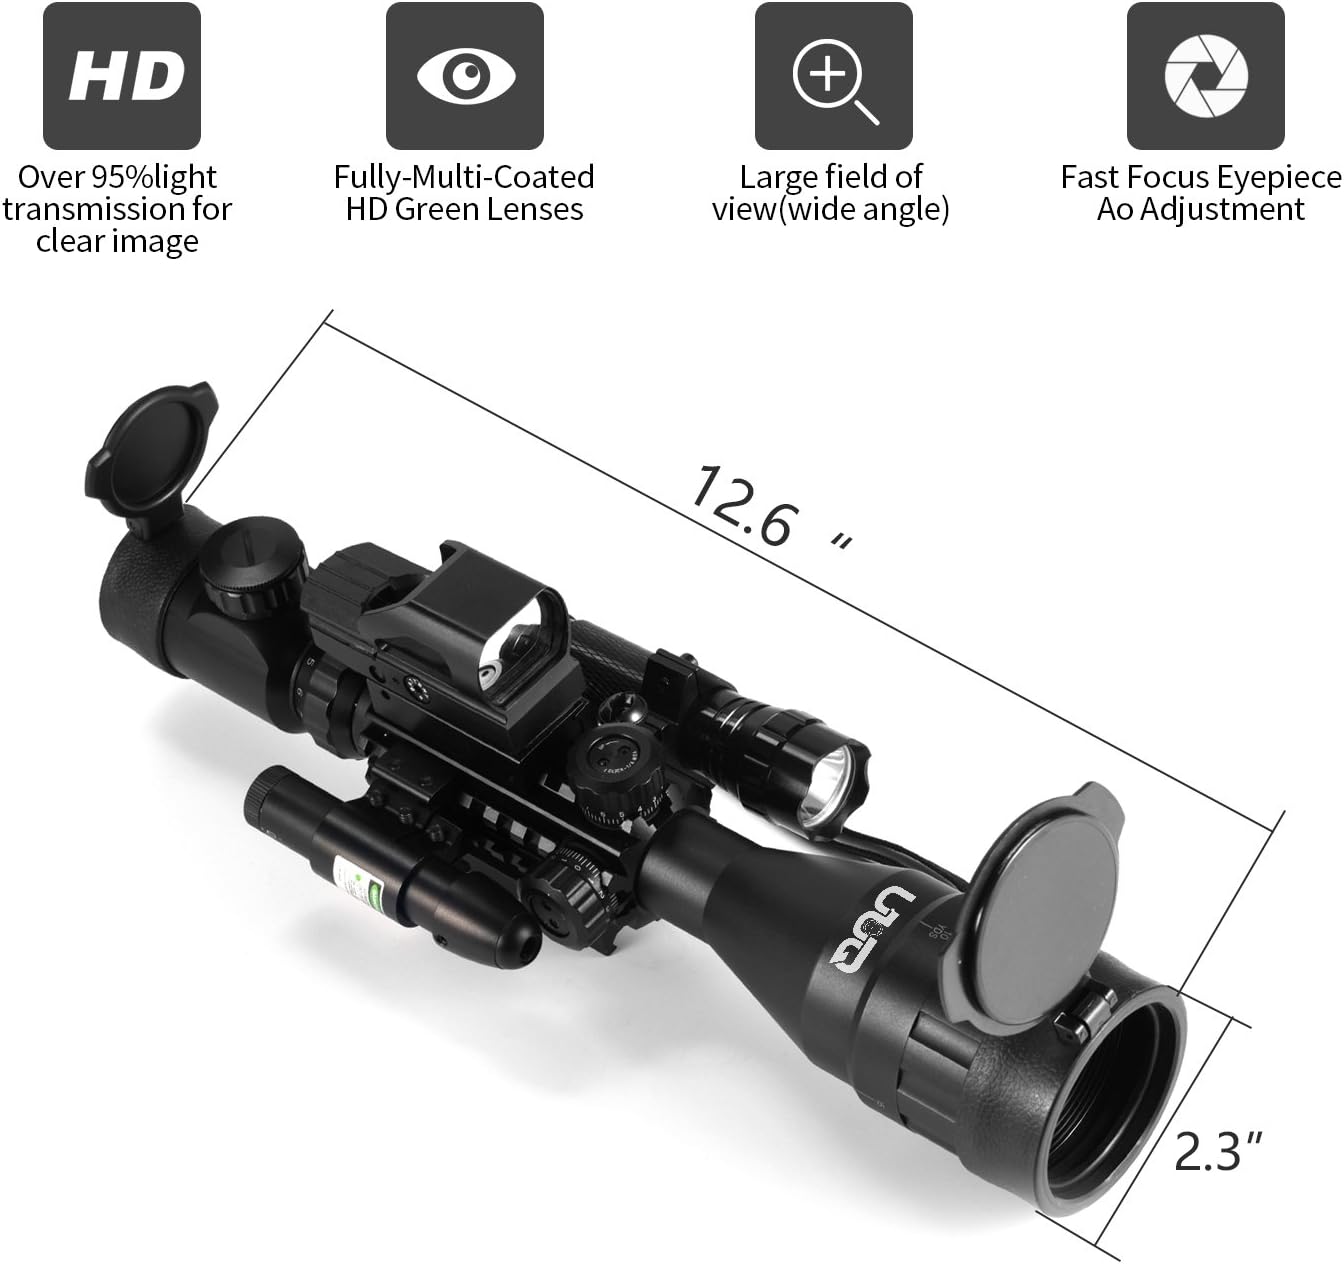 2.5-10X40 Hunting Holographic Tactical Rifle Scope w/ Green Laser Mini Sights